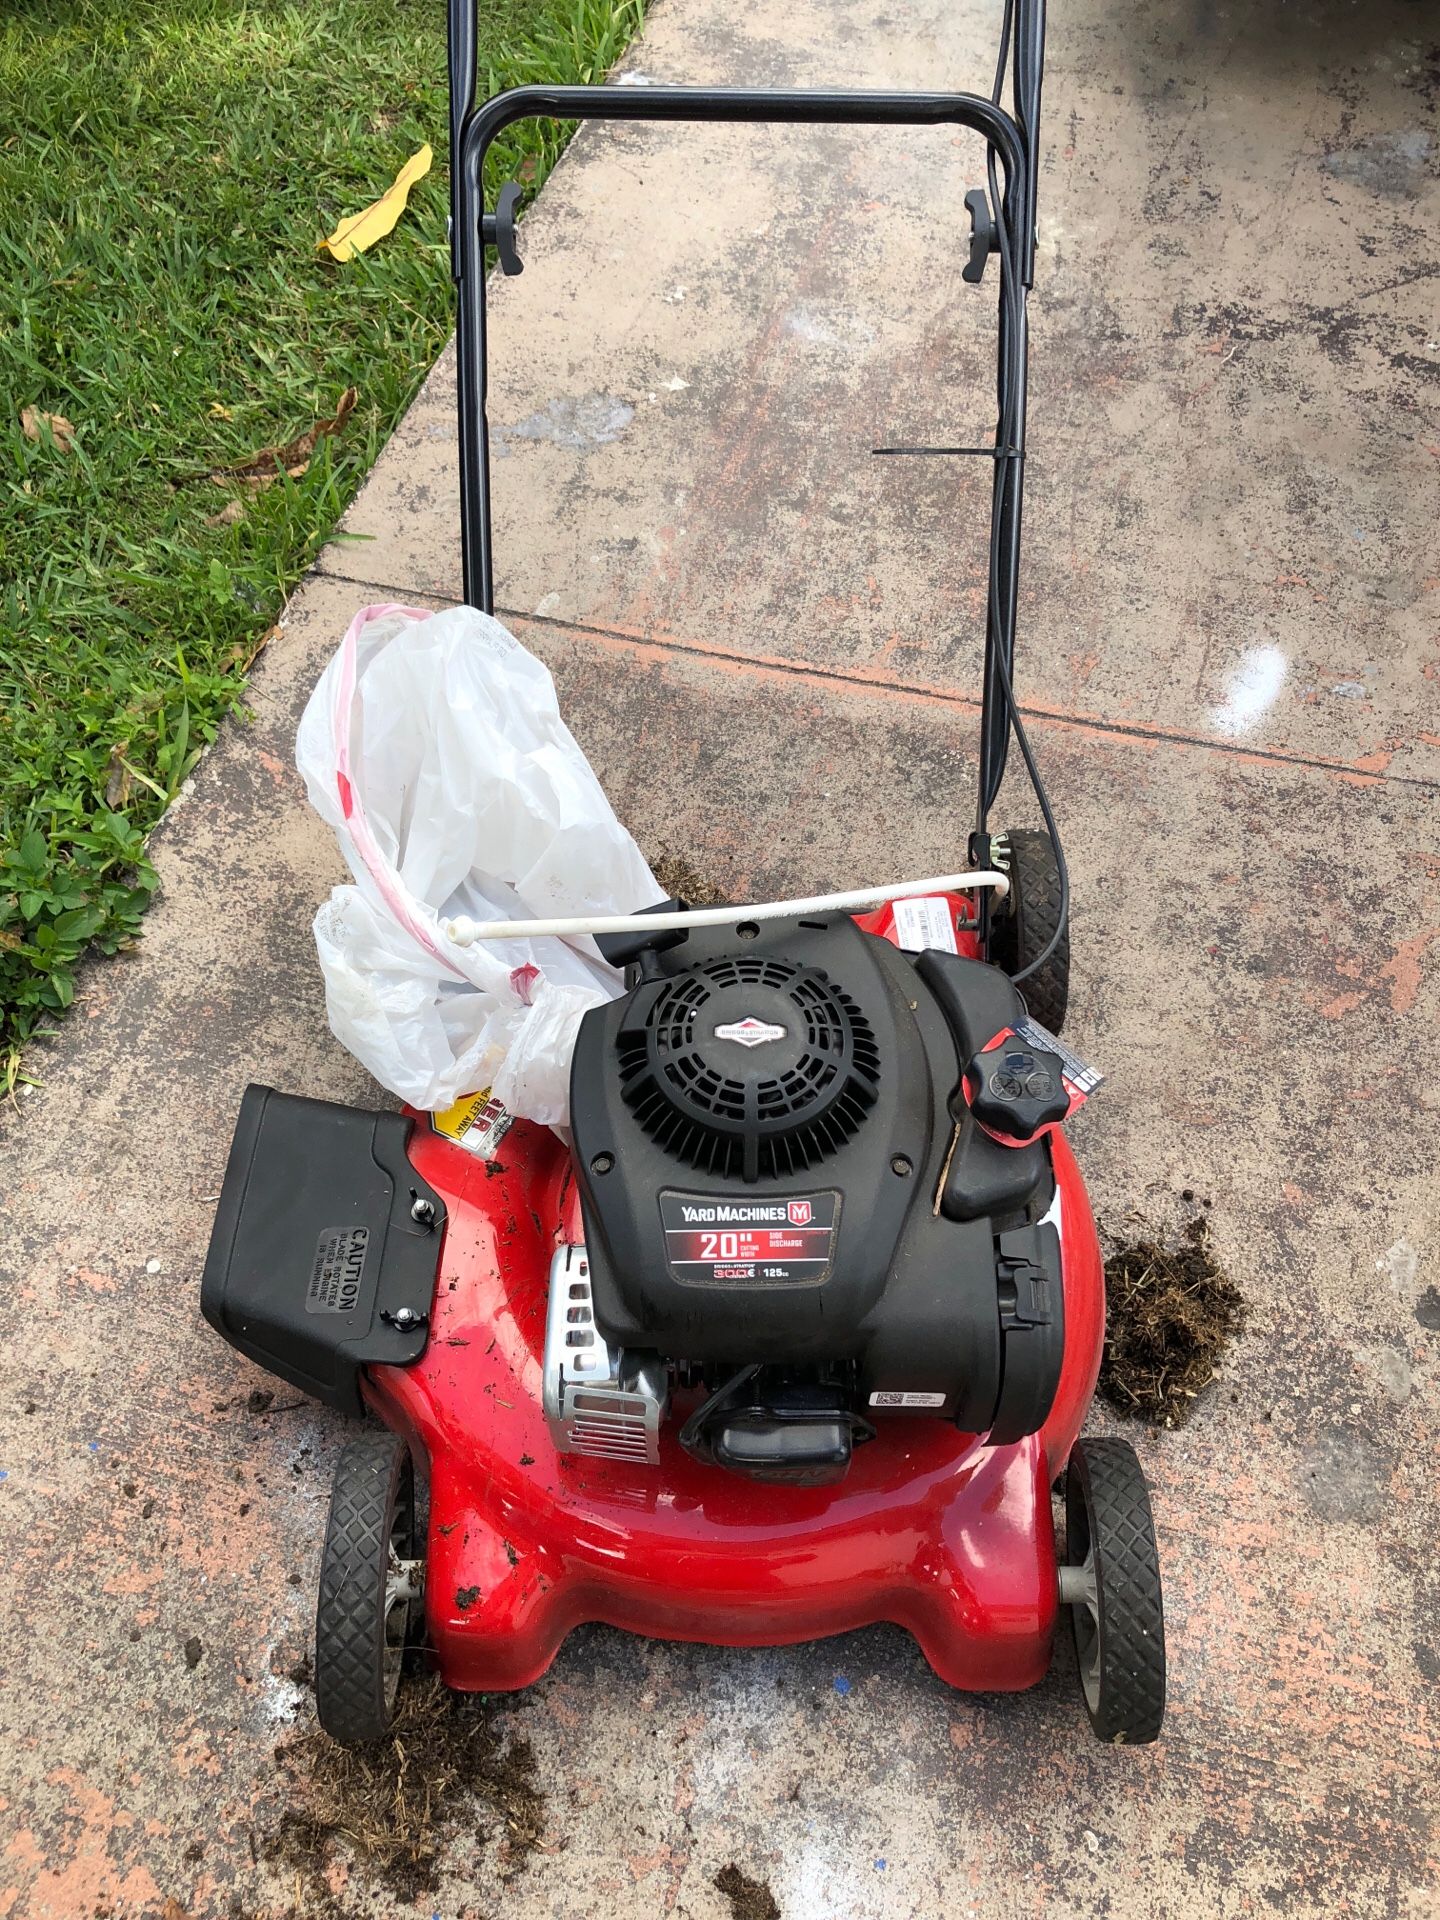 Lawn mower perfect conditions used once